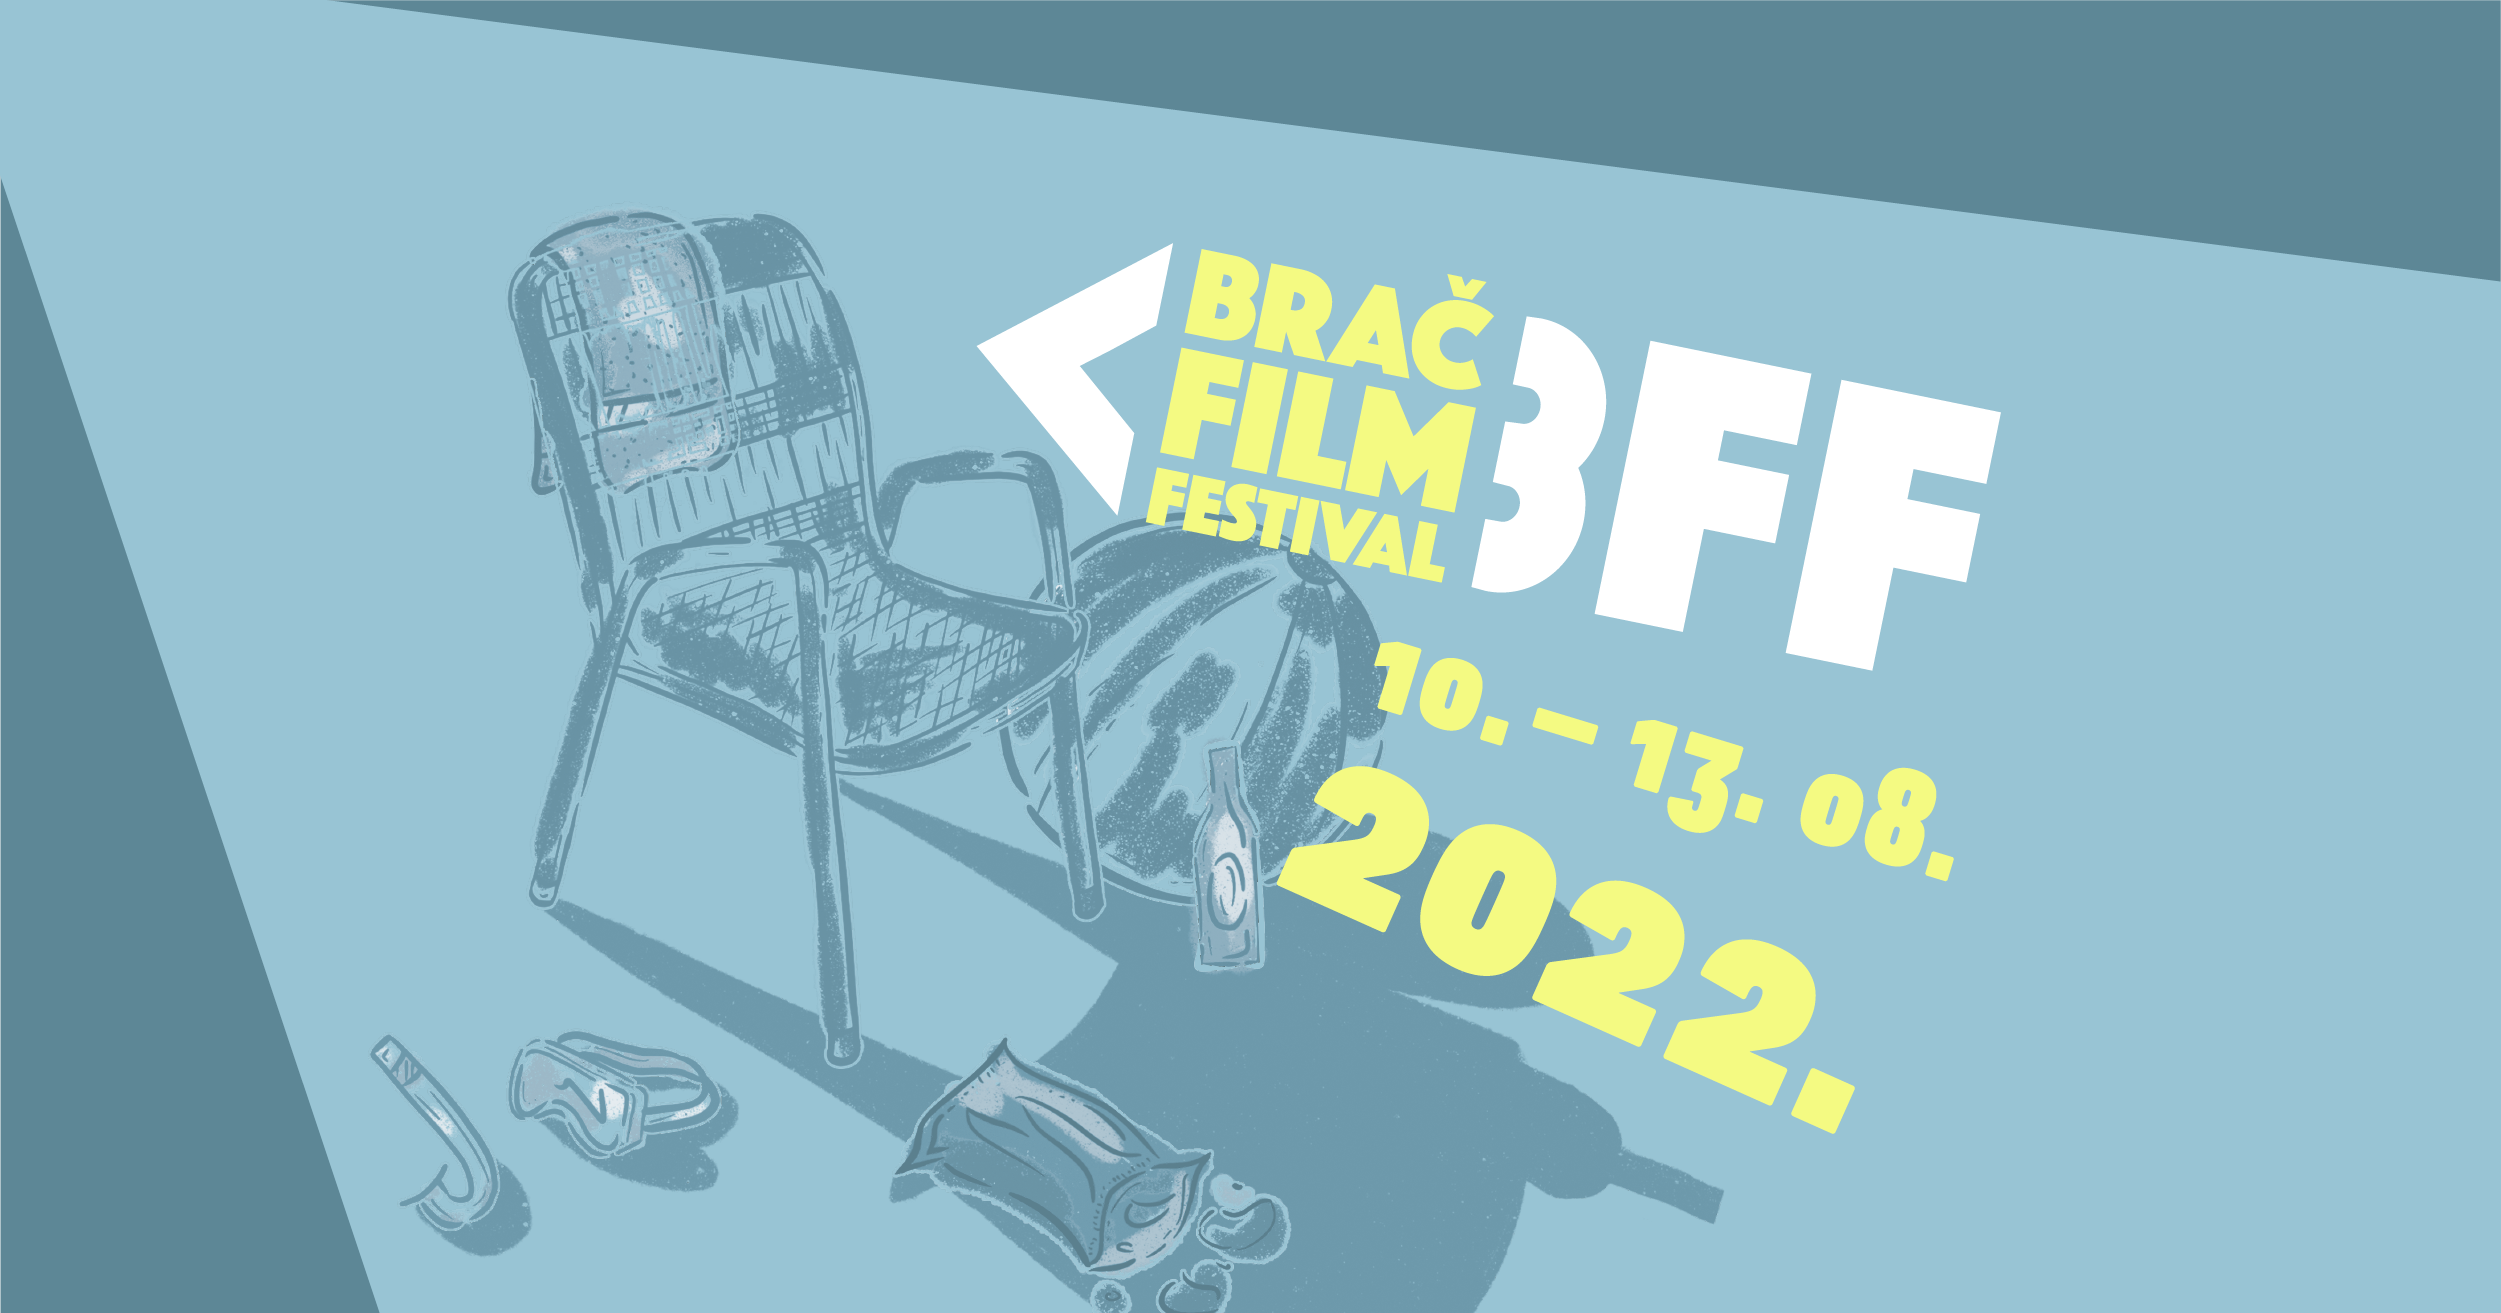 Excellent film titles of island idyllic: this is what this year's Brachi Film Festival brings